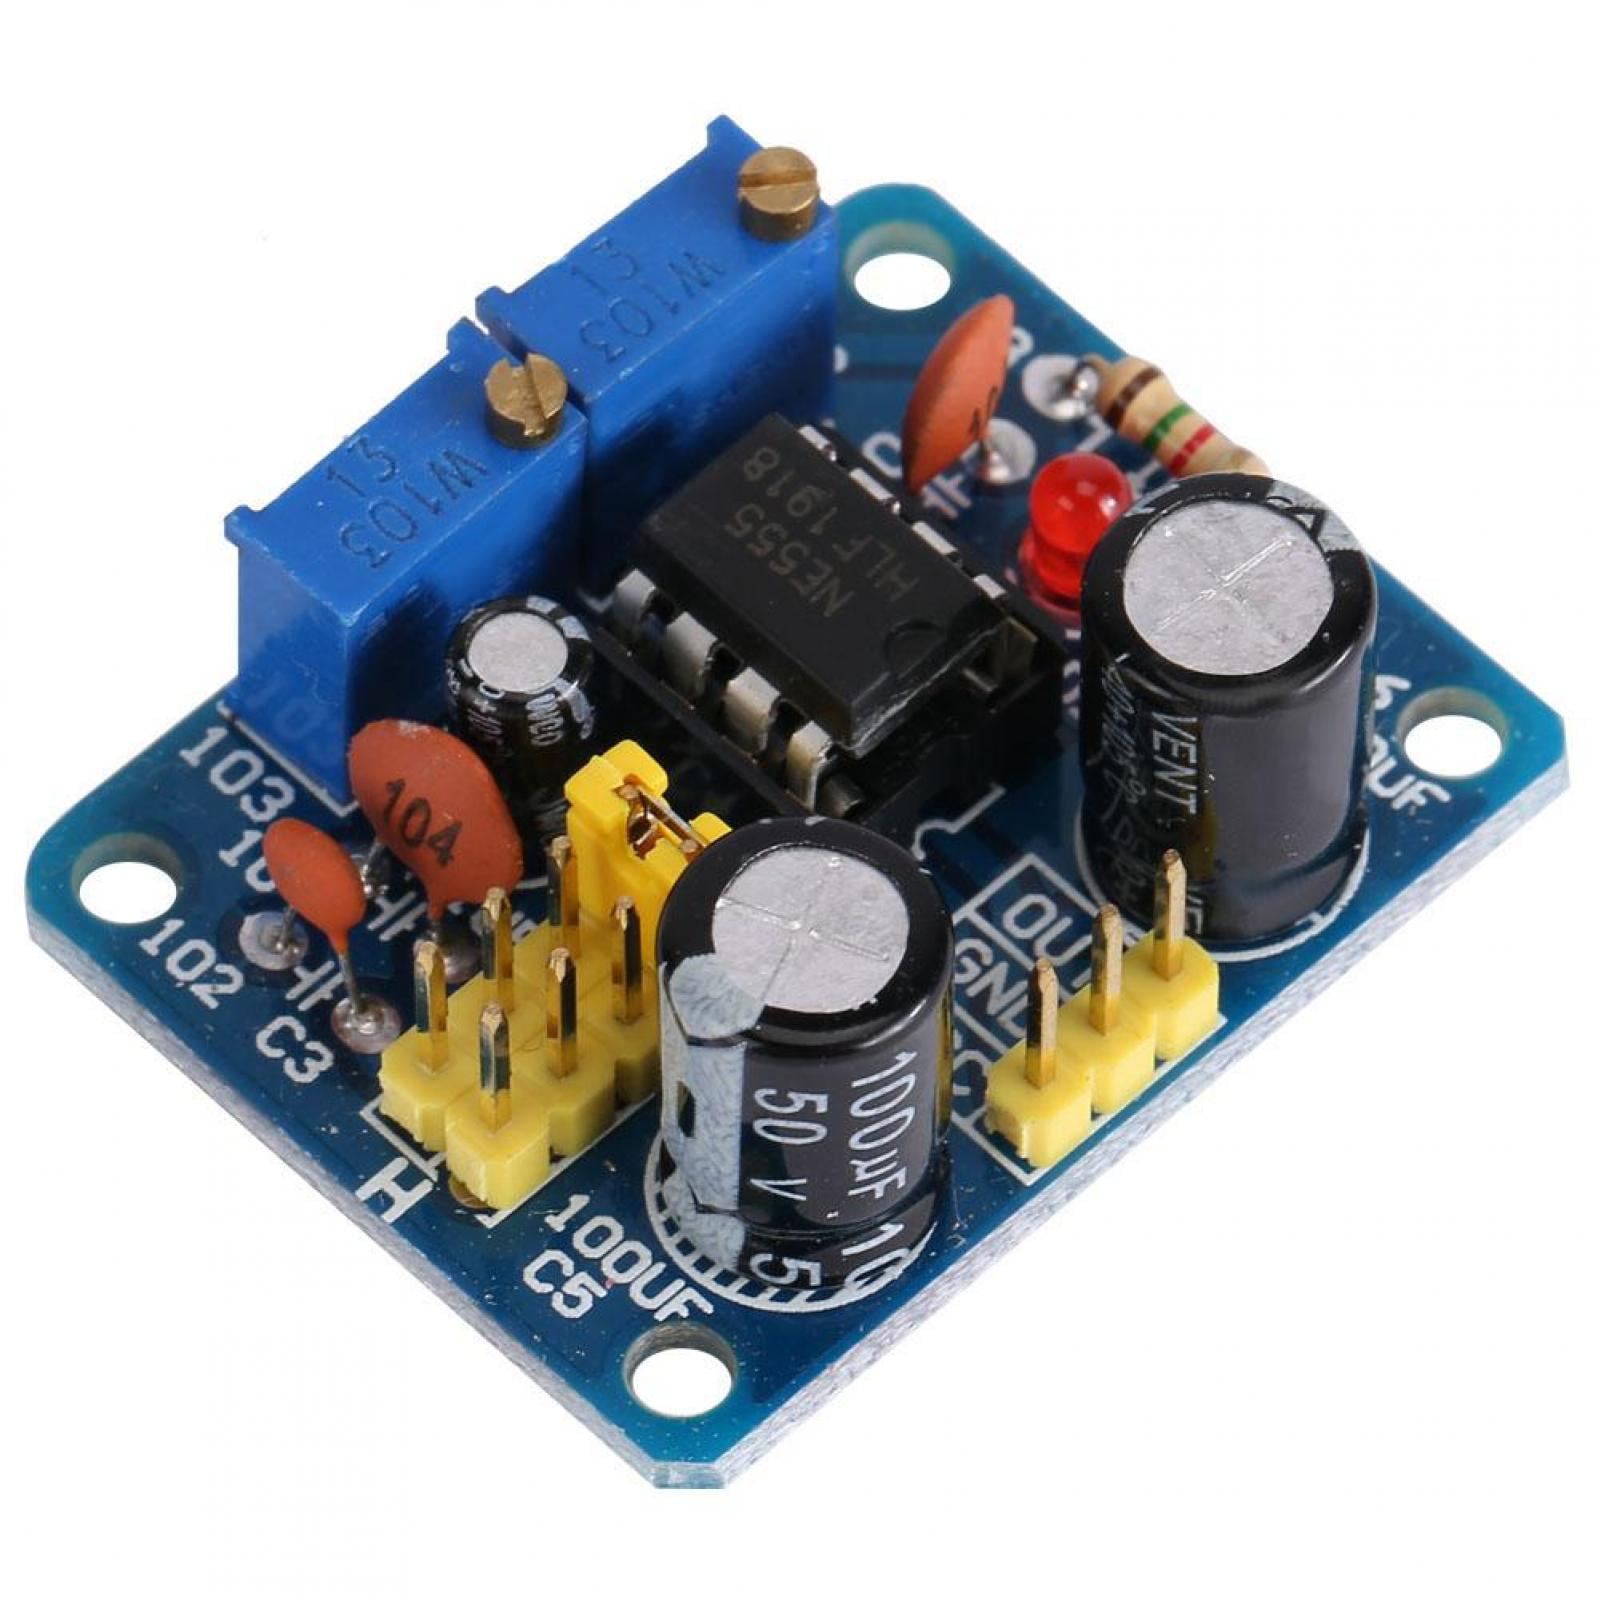 NE555 Duty Cycle and Frequency Adjustable Module Square Wave rectangula​r wave 